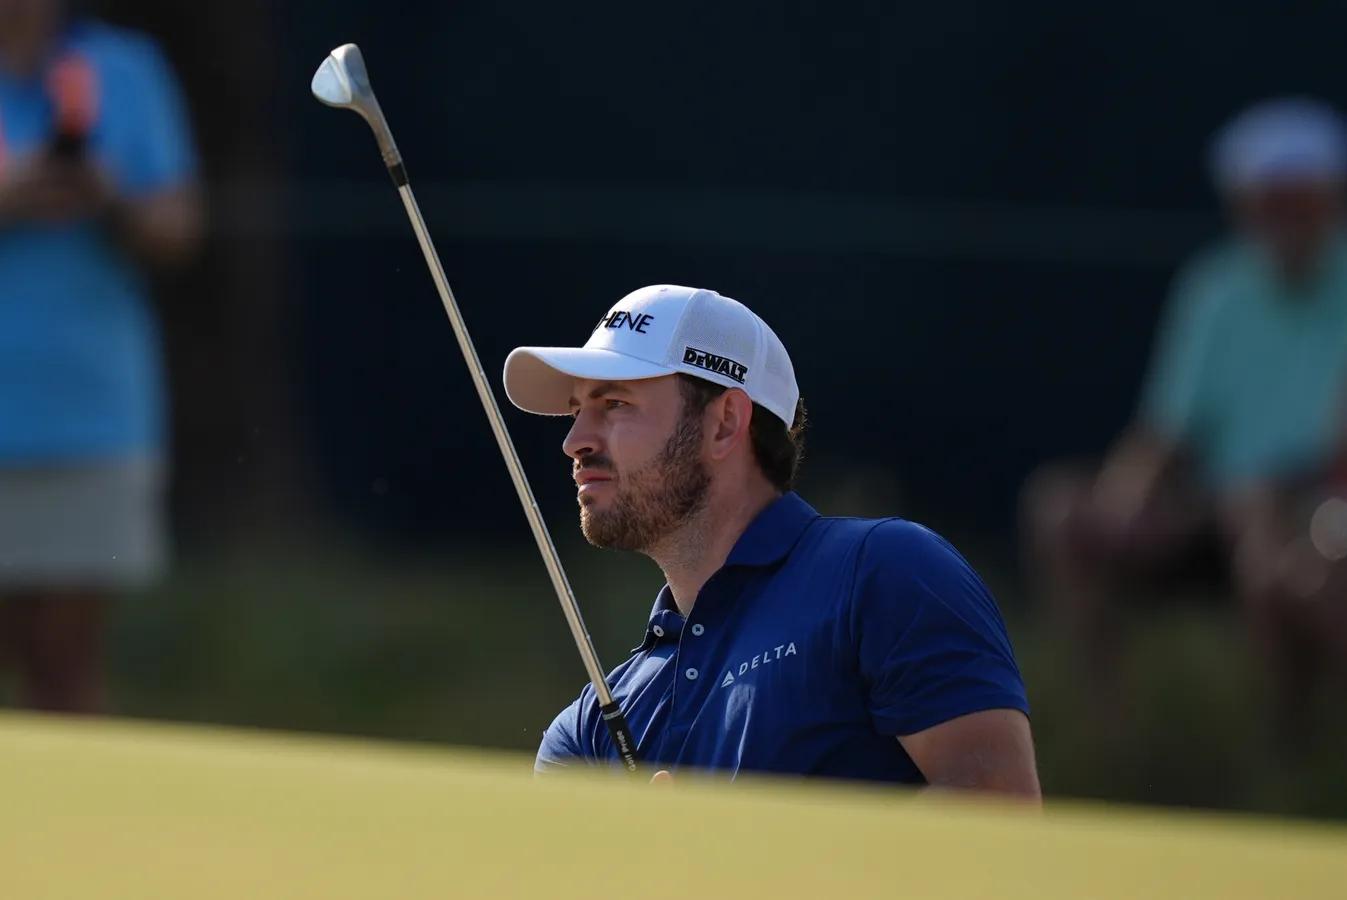 Cantlay, McIlroy Share Lead After First Round of U.S. Open at Pinehurst No. 2